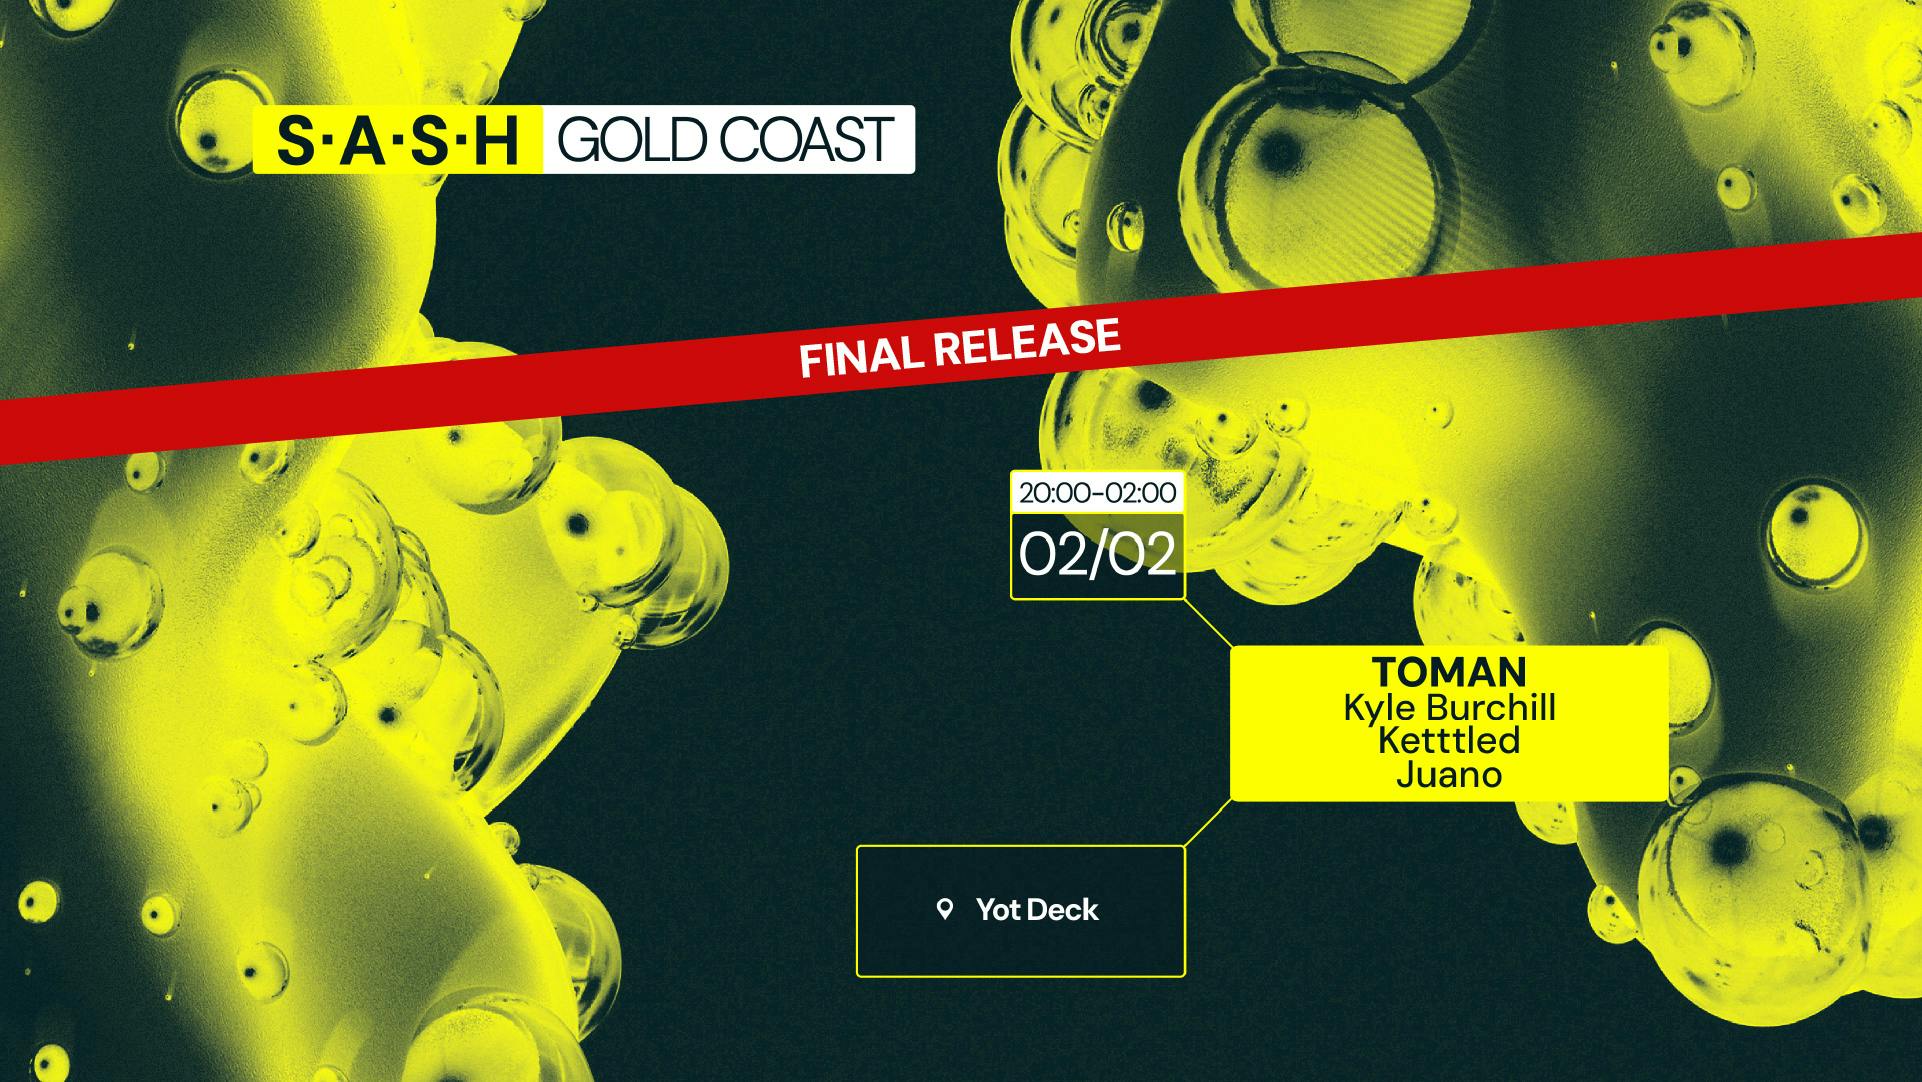 ★ S.A.S.H Gold Coast ★ Toman ★ Friday 2nd Feb ★ FINAL RELEASE